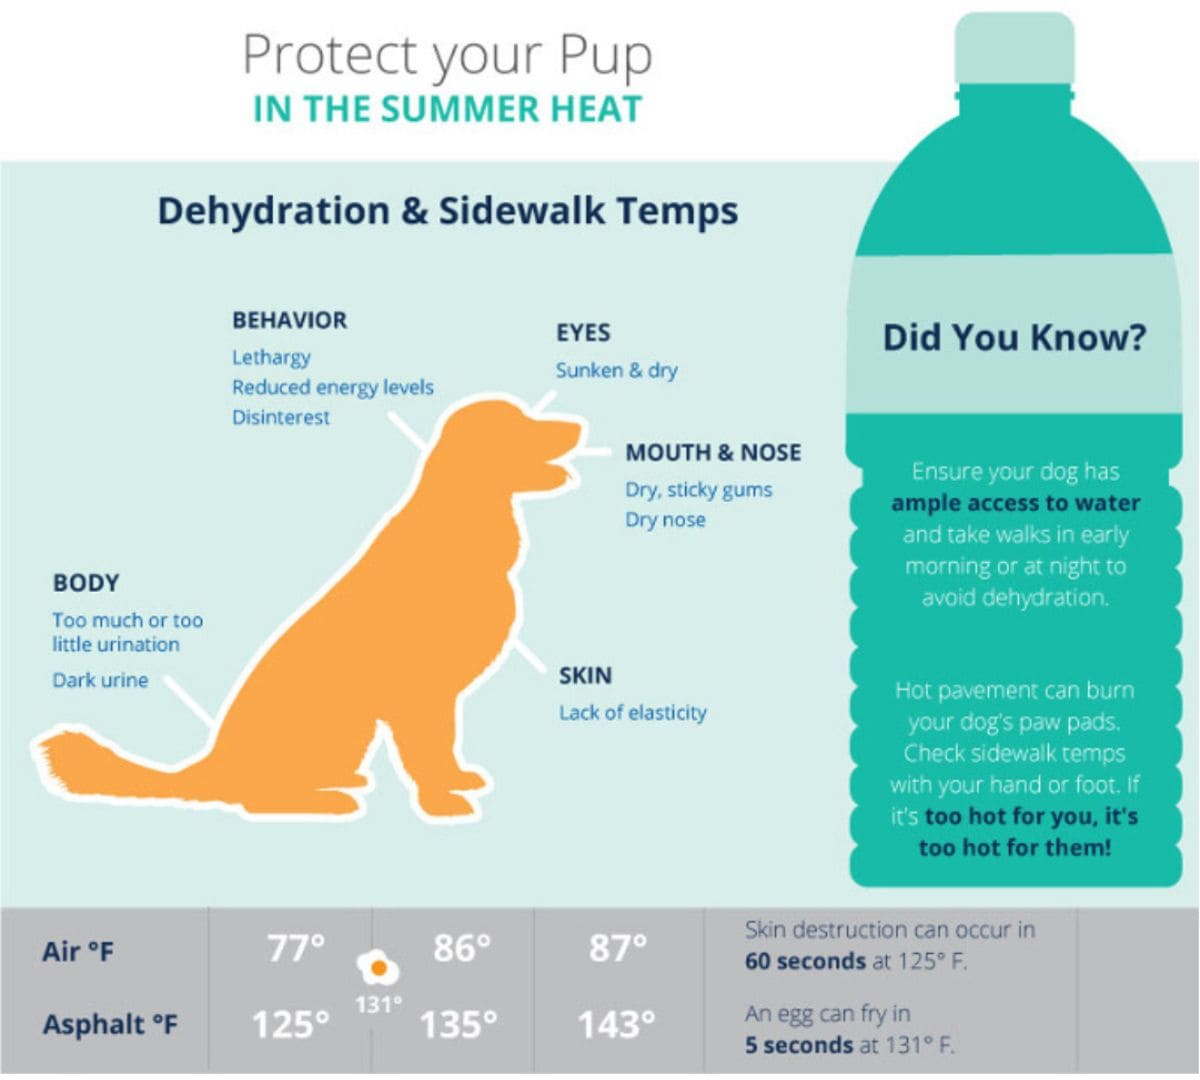 Protect your pup in the summer heat information